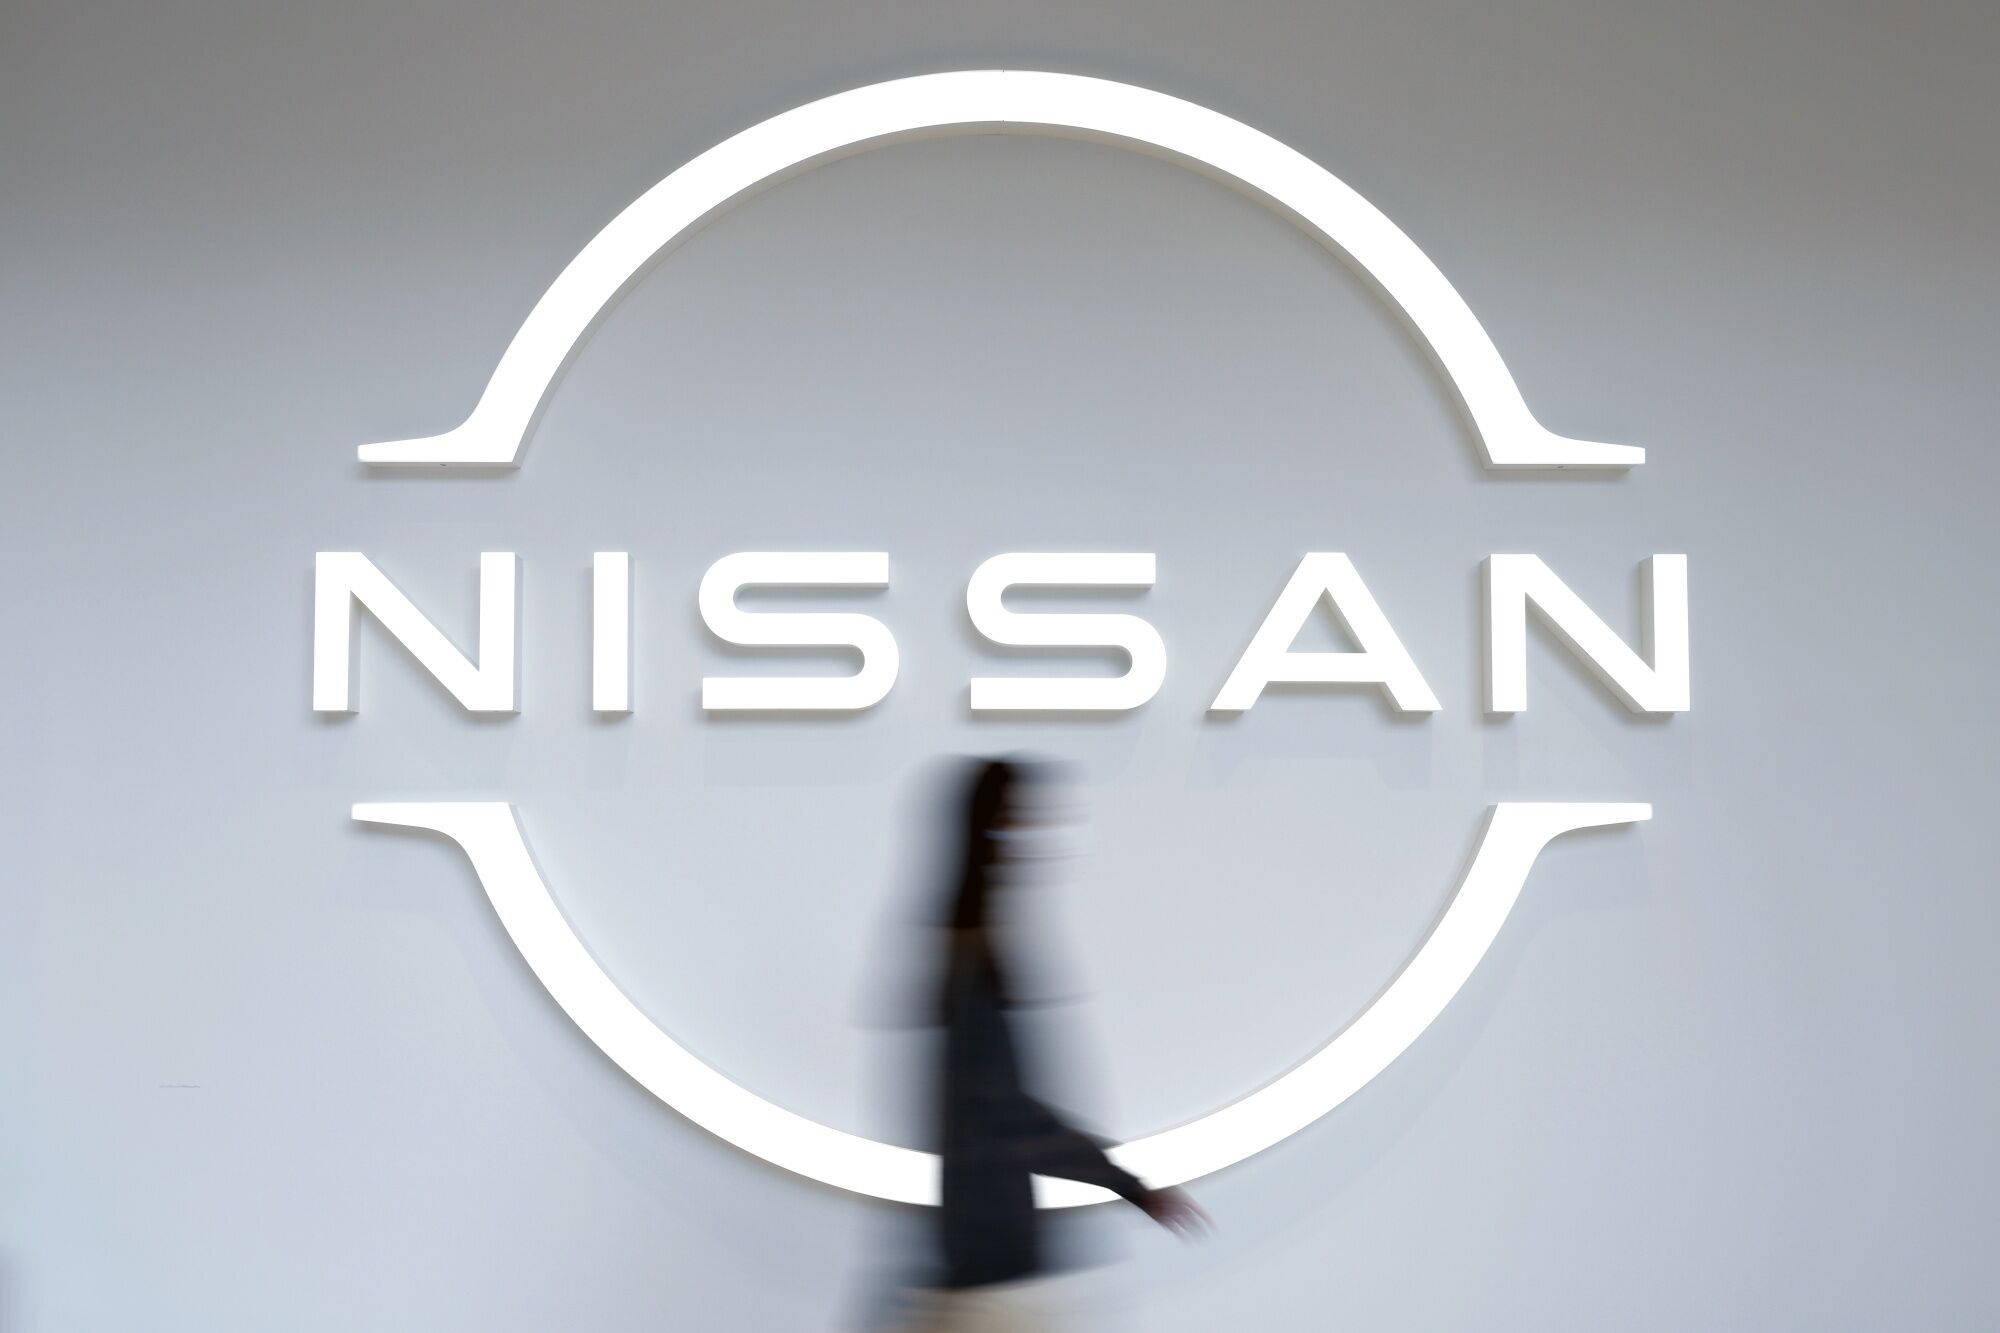 nissan drops after missing annual profit forecast on weak sales